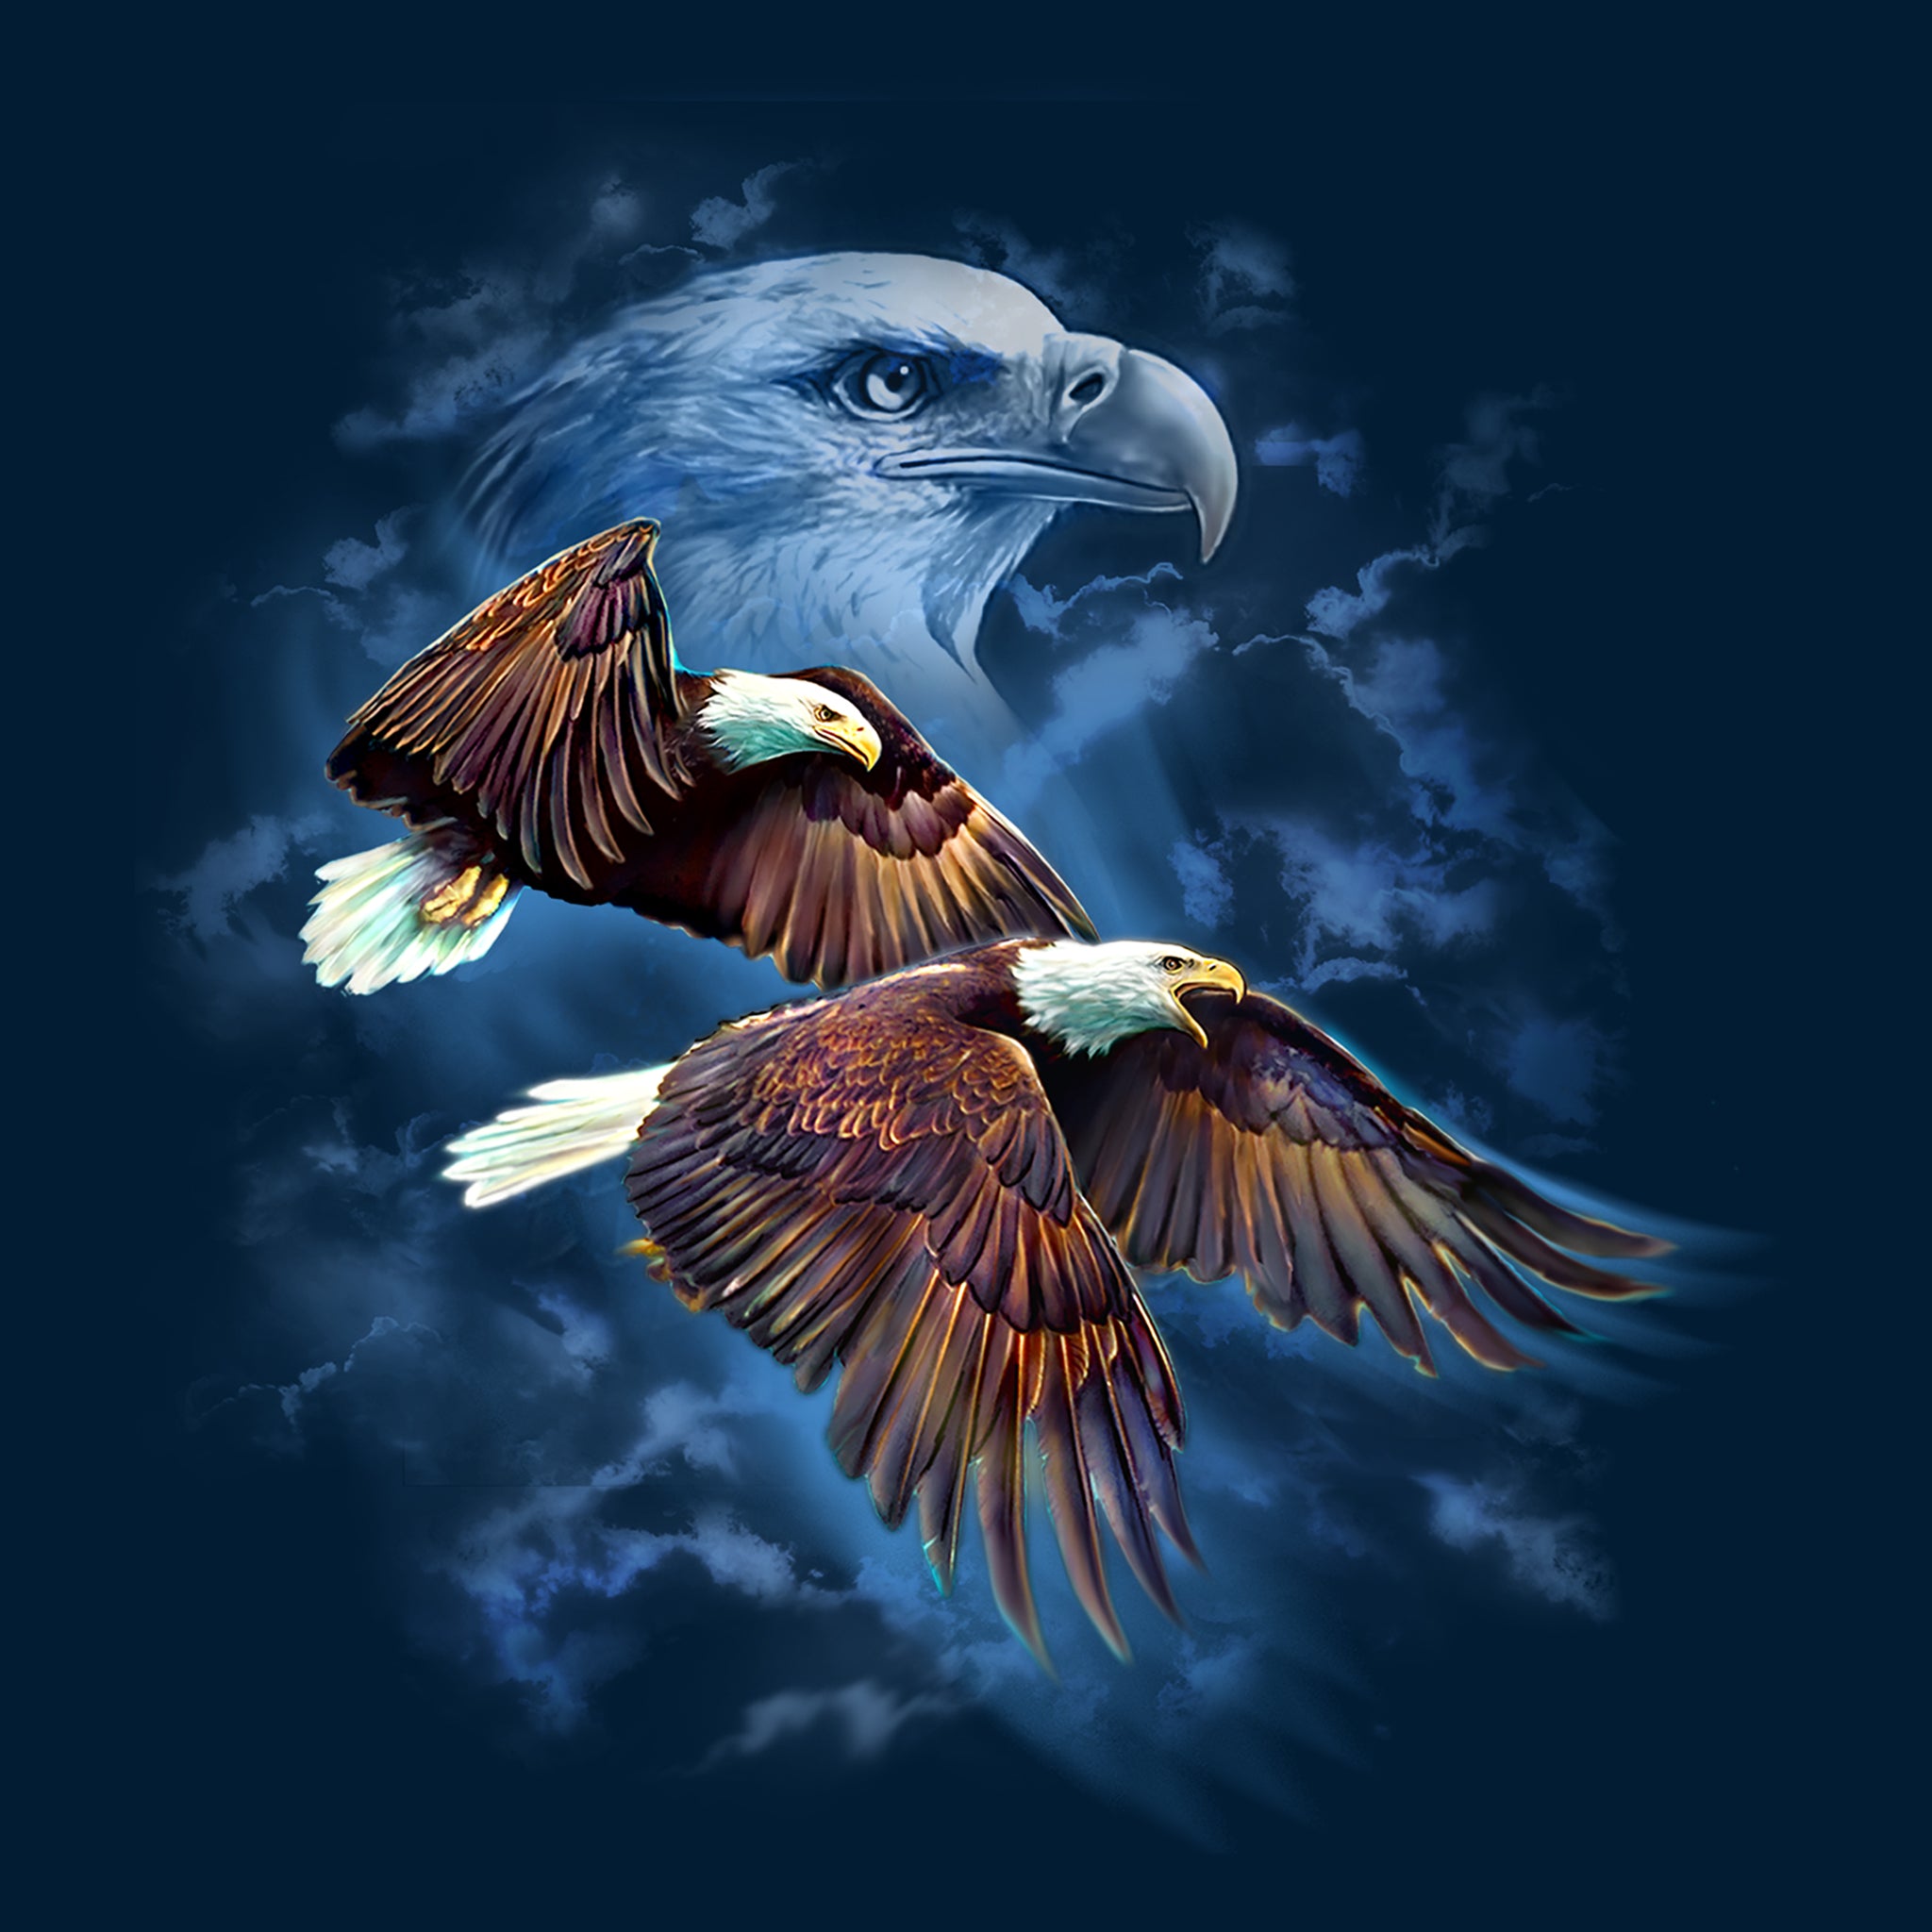 Night Flyers by Tami Alba - painting of eagles flying with eagle portrait in the background